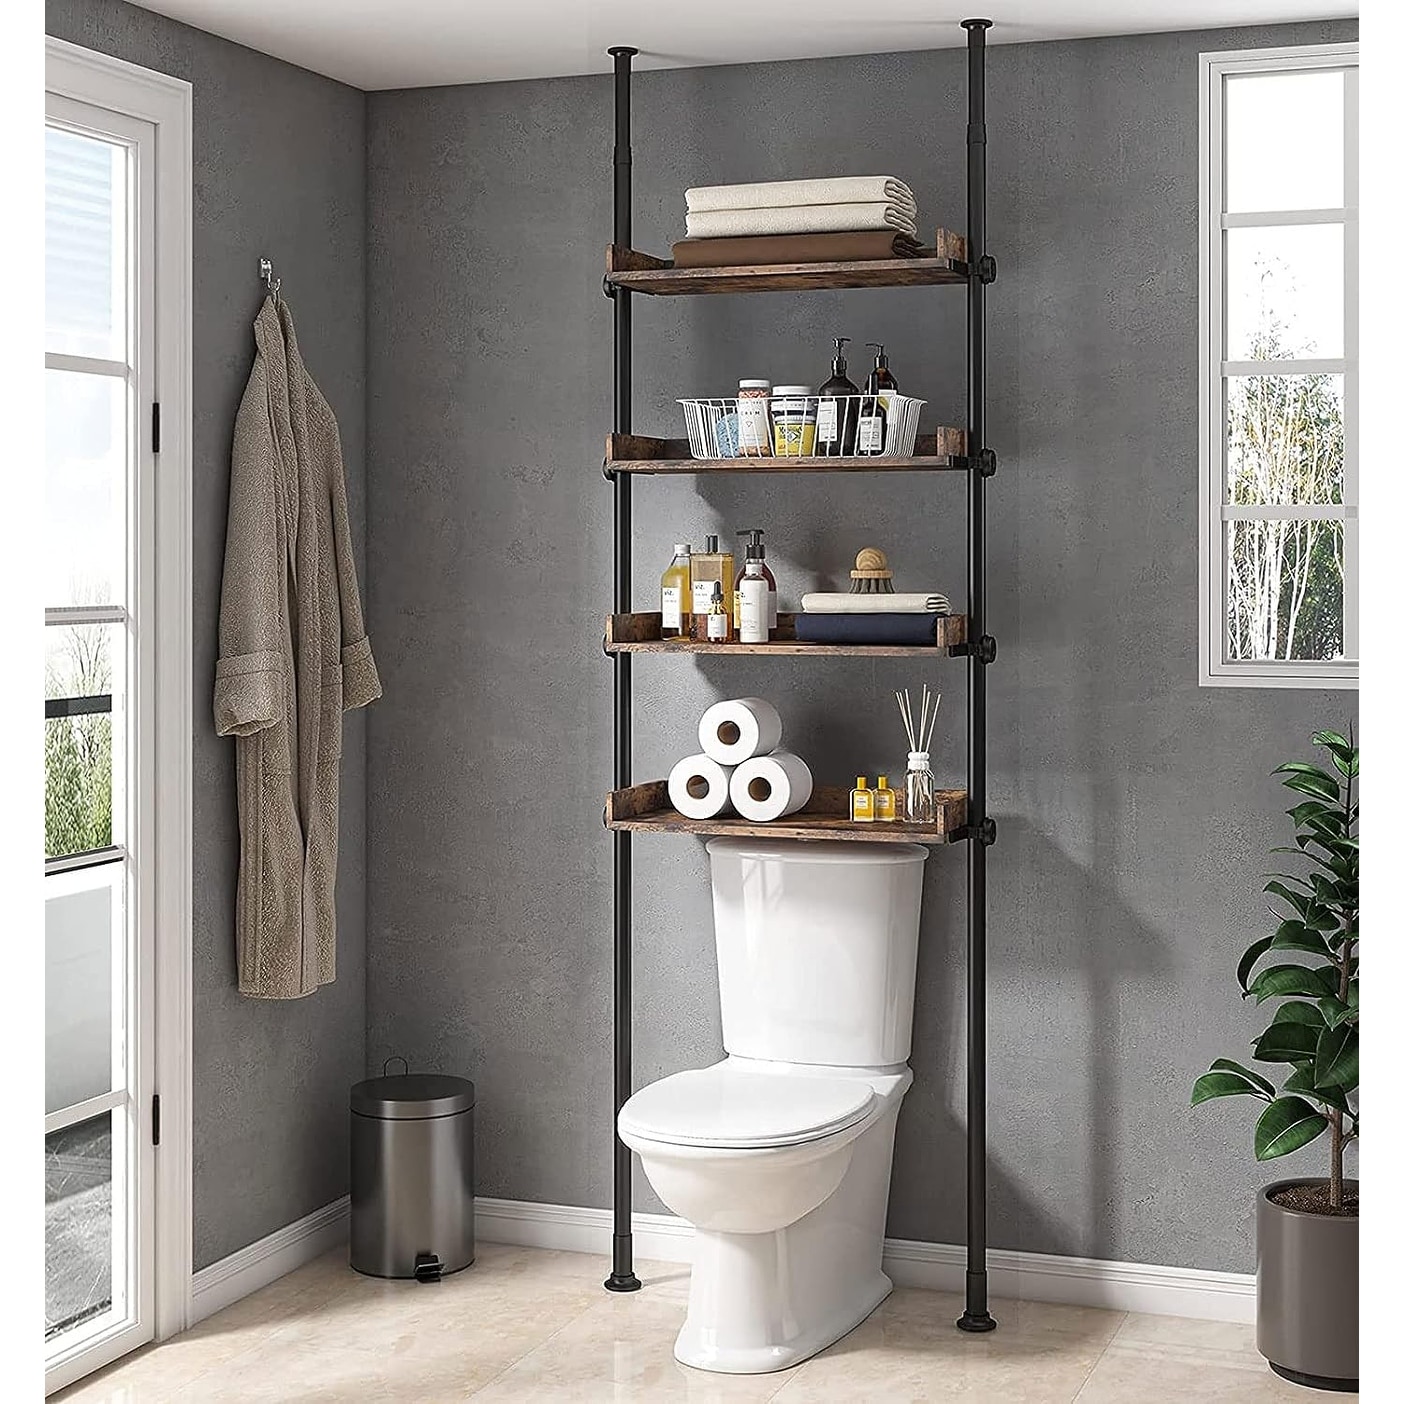 https://ak1.ostkcdn.com/images/products/is/images/direct/b7d3aebe3bee34058126a0de4c5019e4dfdb1531/4-Tier-Over-The-Toilet-Shelf%2C-92-to-116-Inch-Tall.jpg